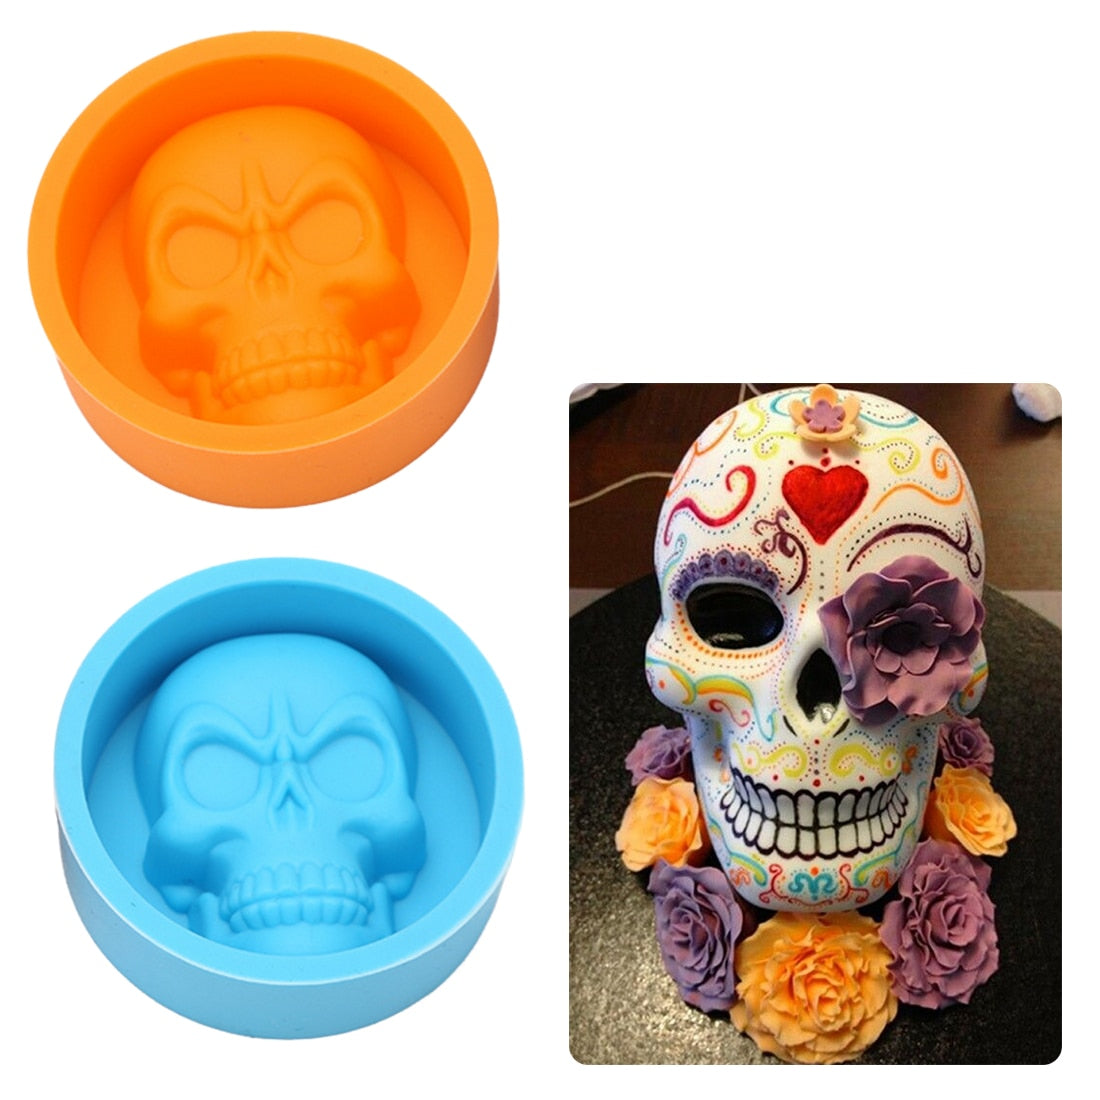 New Arrival 3D Skull Head Silicone Mold Home Party Fondant Cake